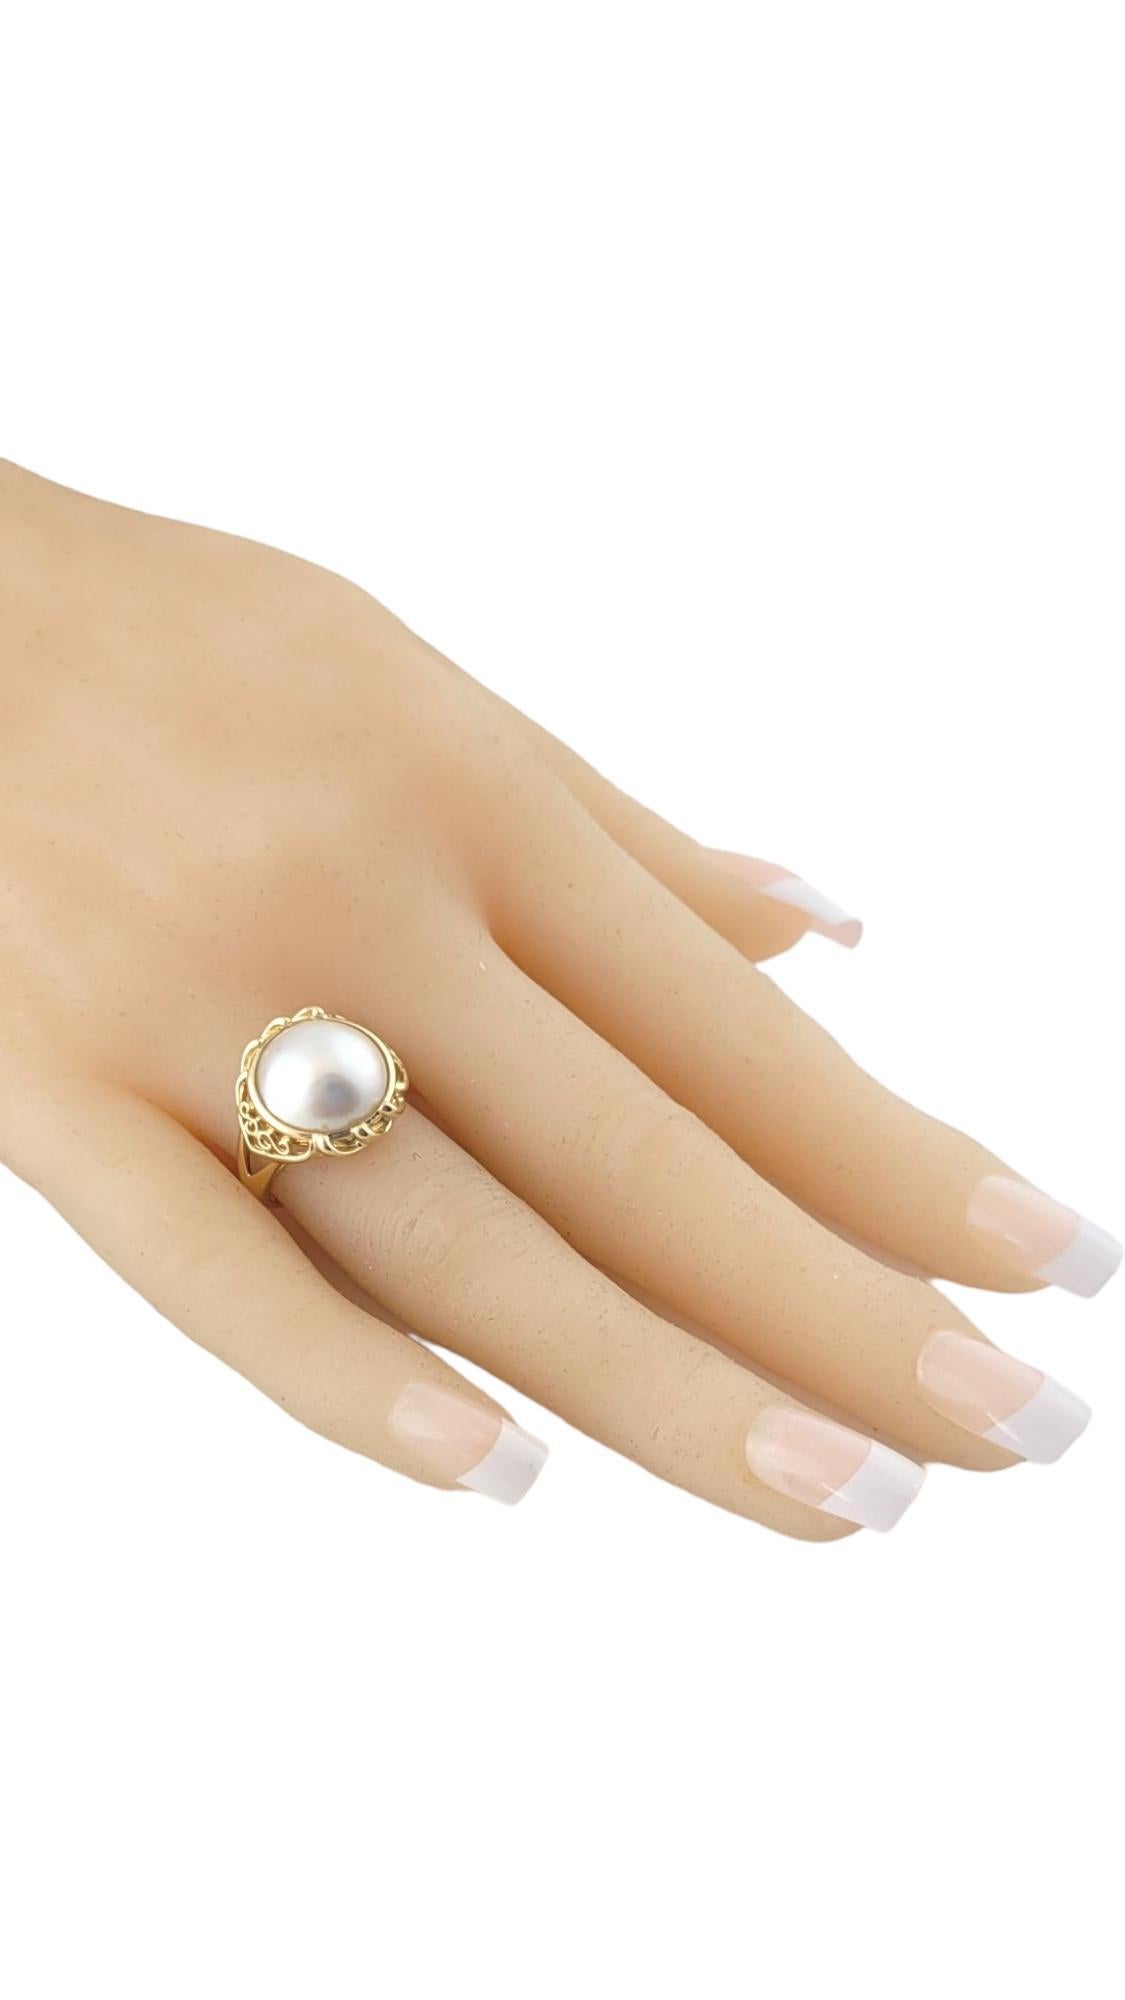 14K Yellow Gold Mabe Pearl Ring Size 6.25 #16366 For Sale 1